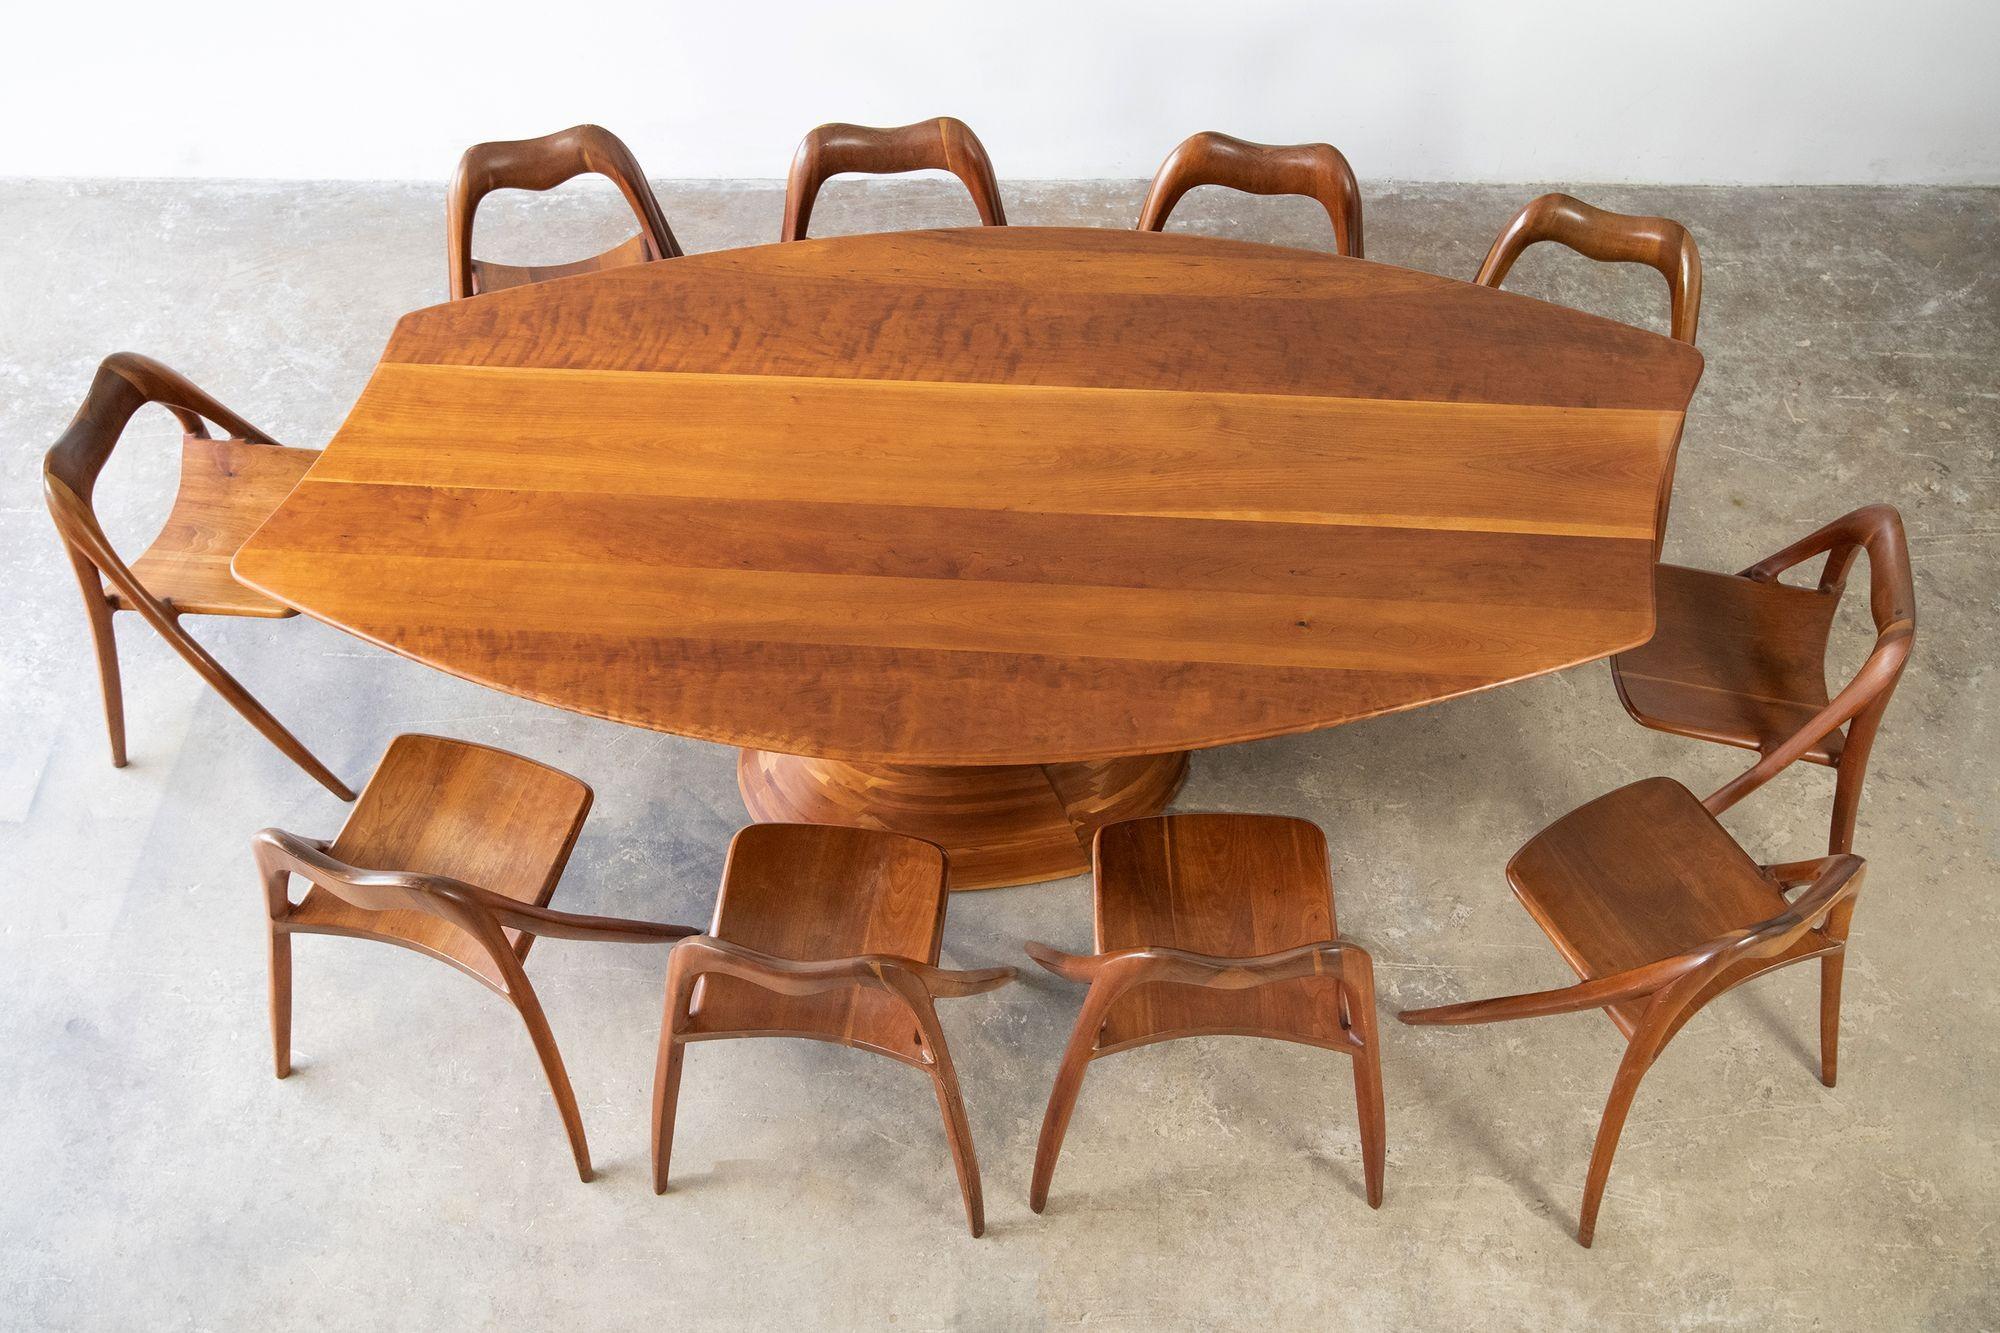 Claude Terrell Magnum Opus Dining Set 1970s Organic Studio Crafted Modernism For Sale 6